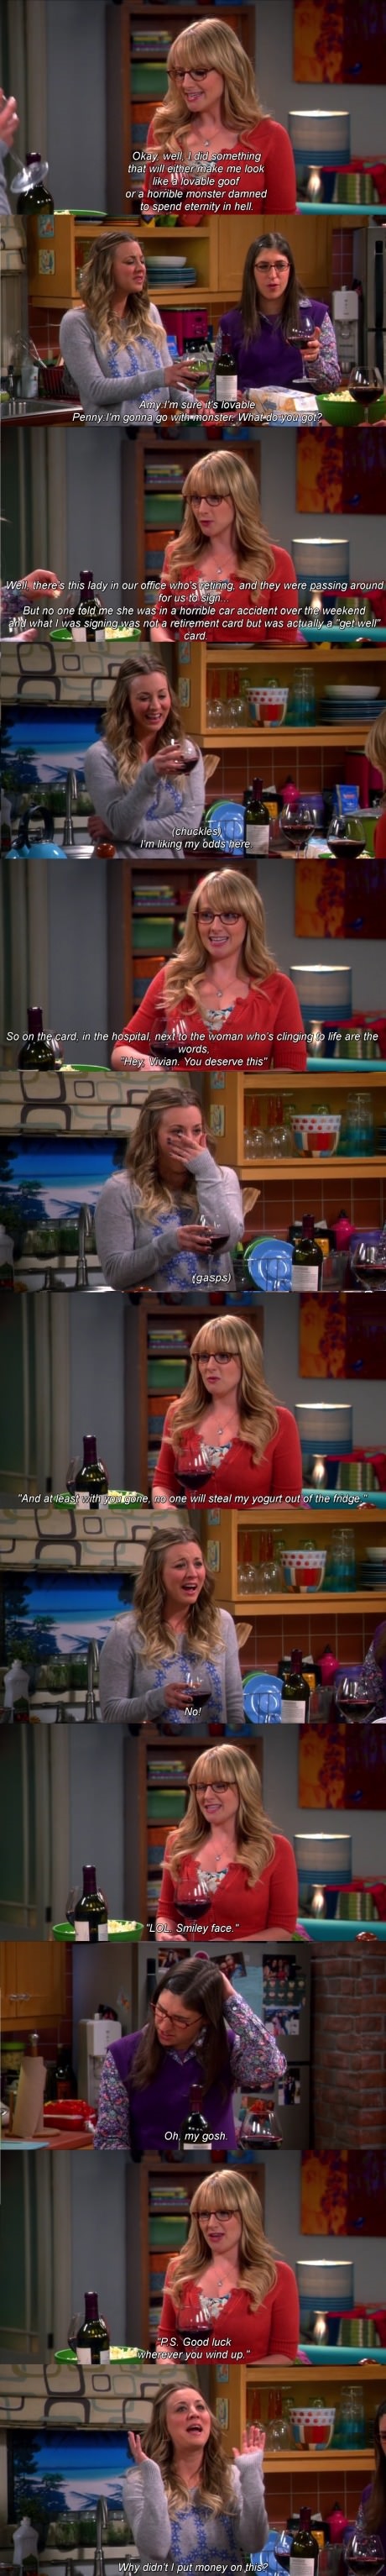 funny-picture-bernadette-the-big-bang-theory